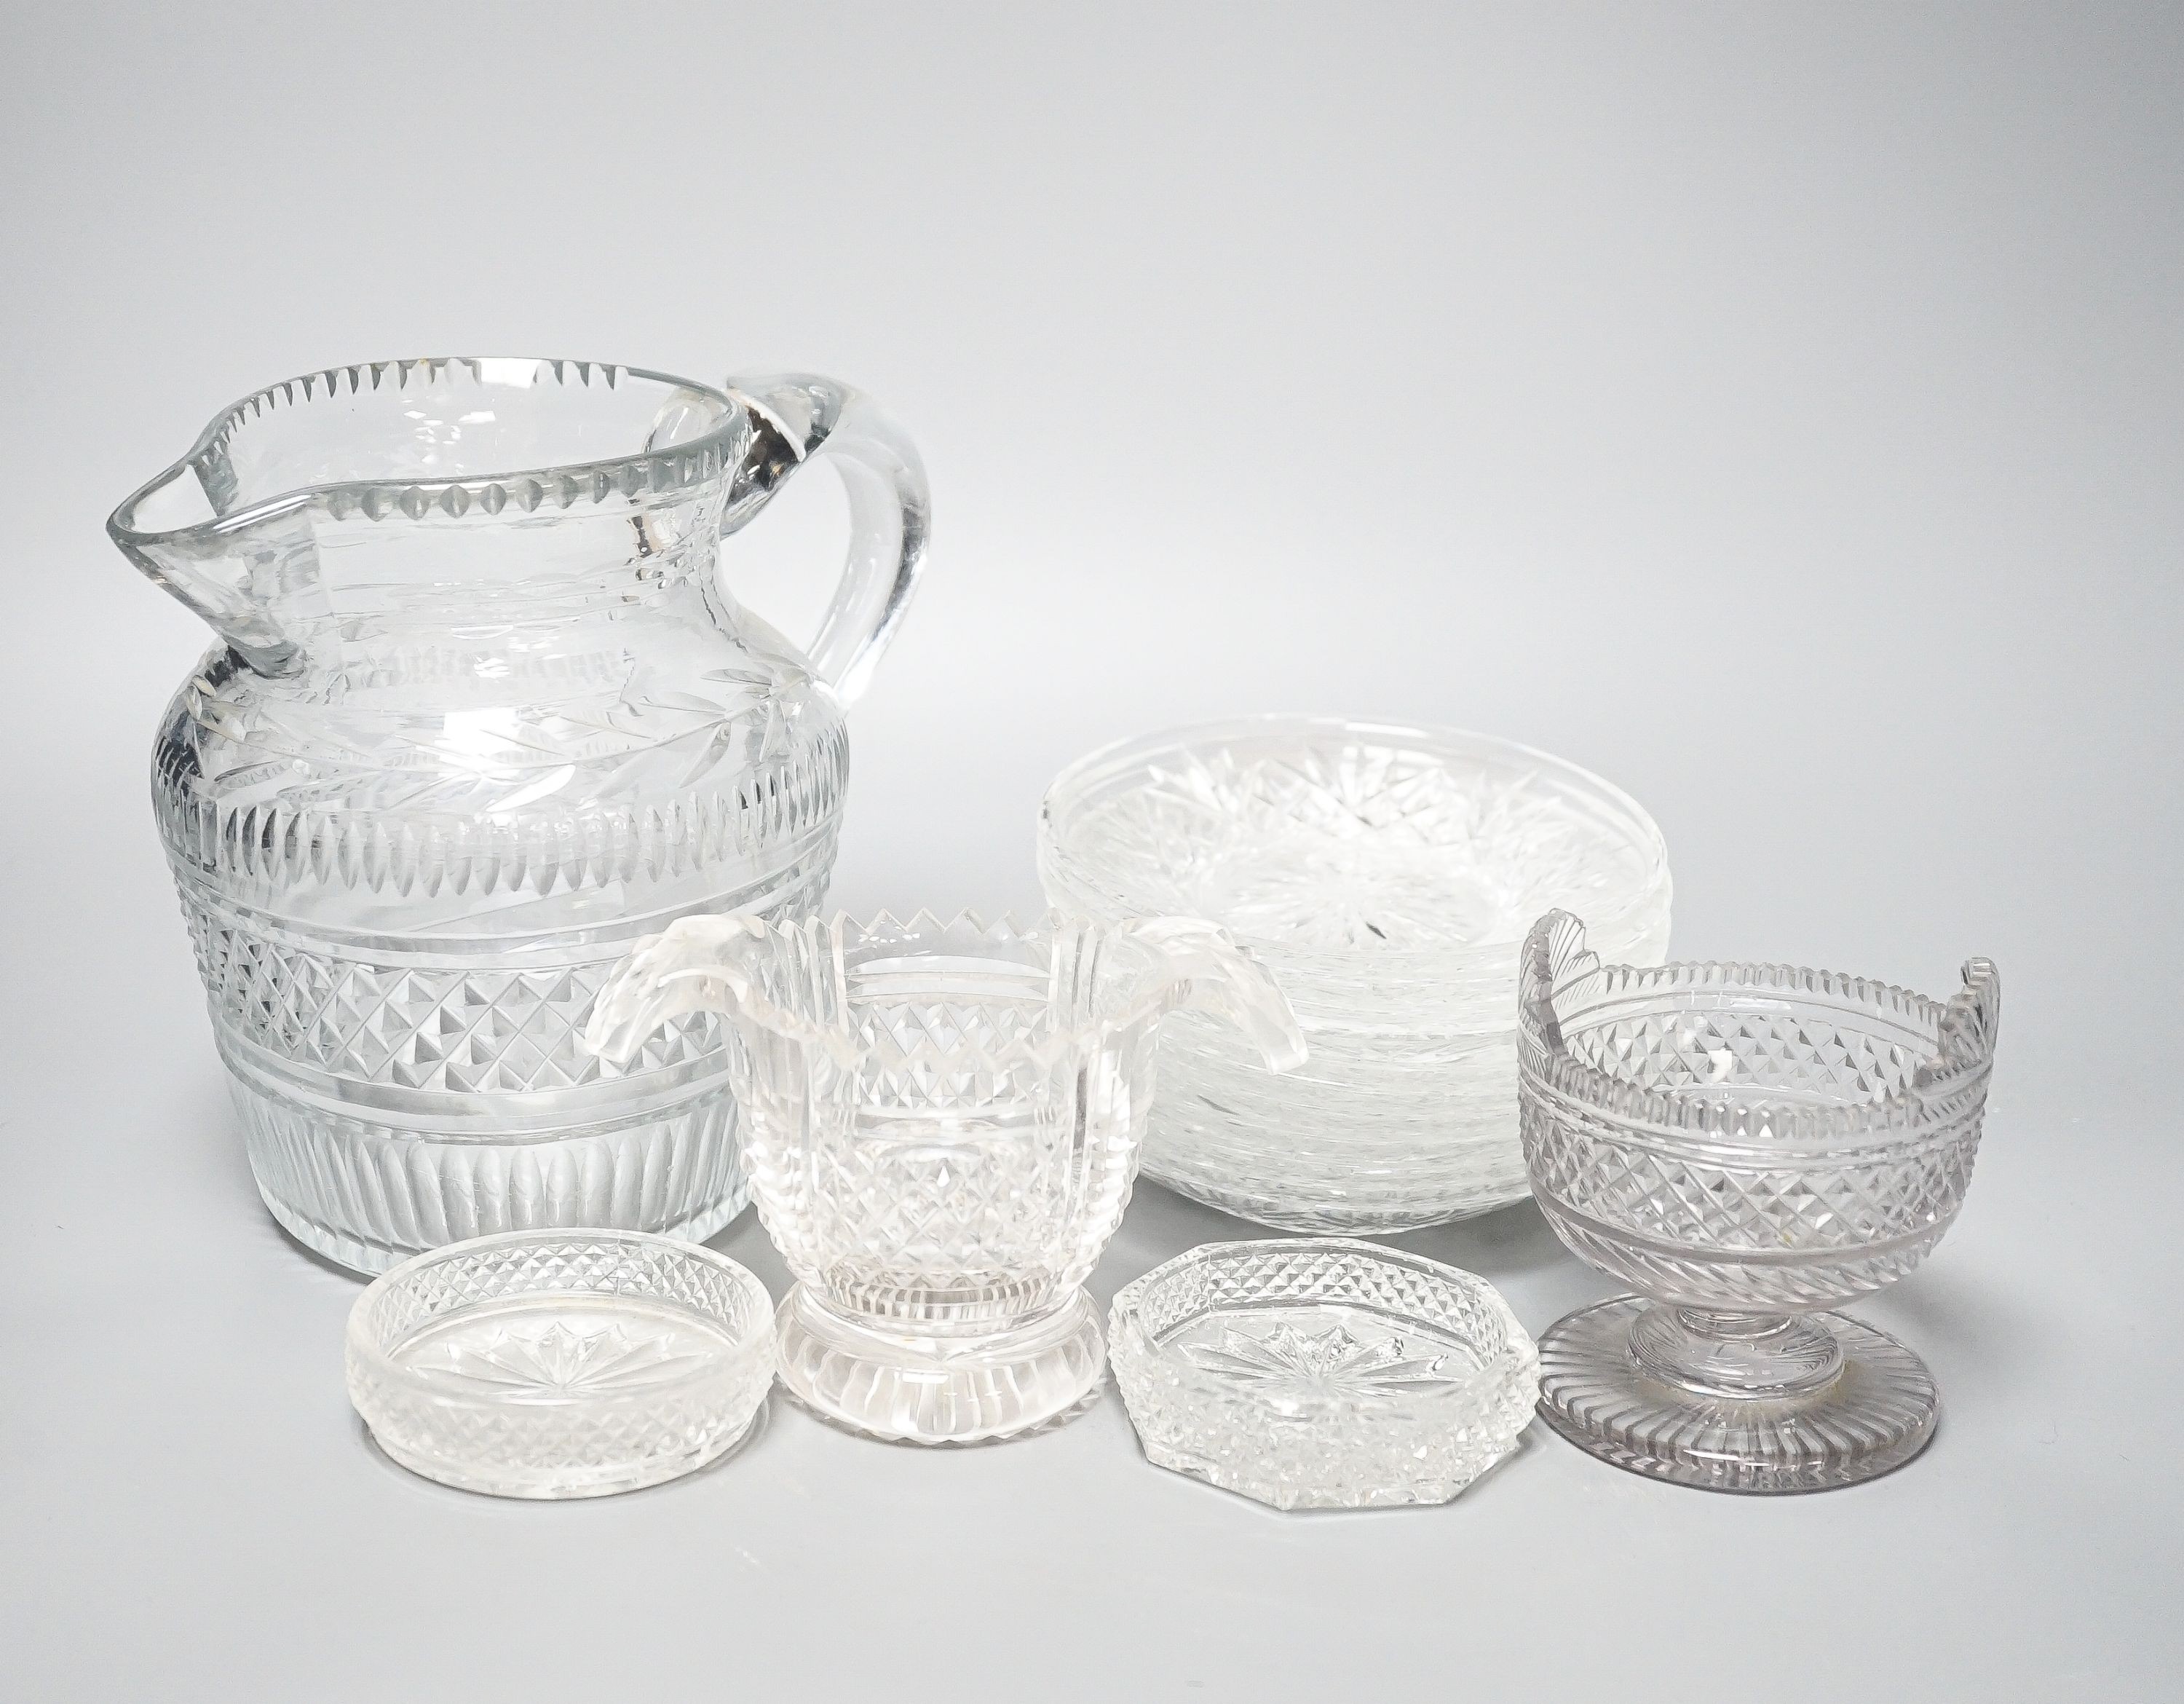 19th century and later deep cut glassware, including a set of six rinsers with turnover handles, 8cm high